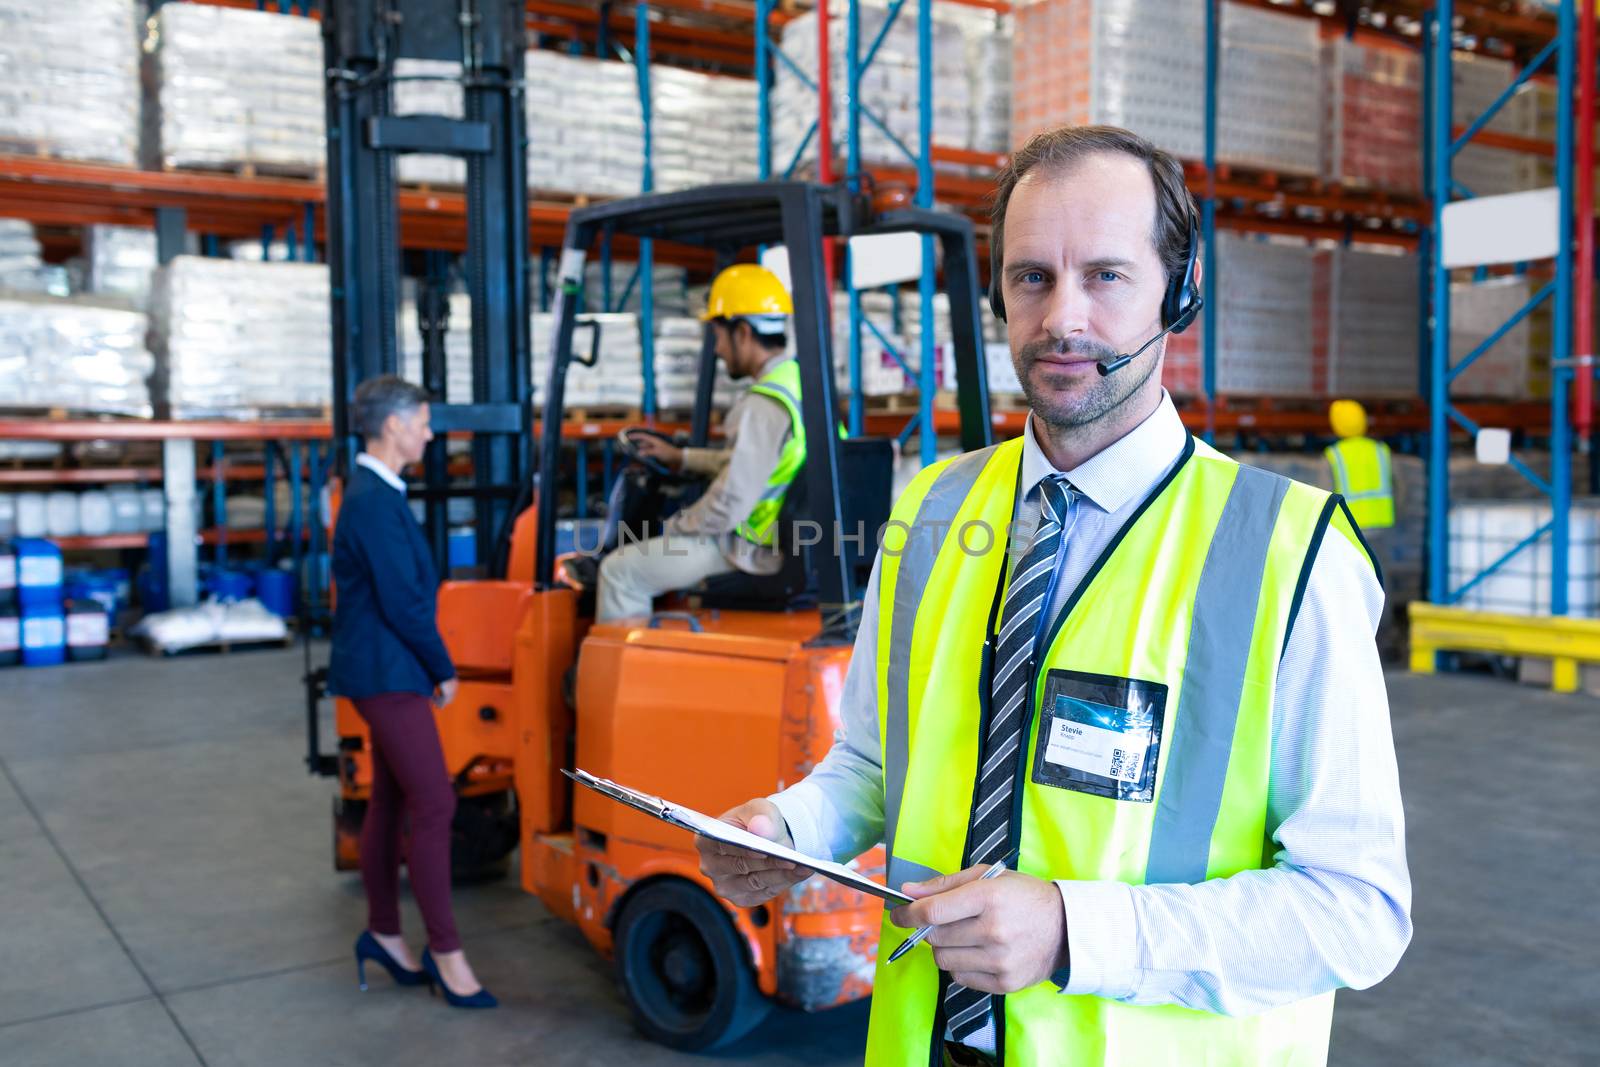 Front view of handsome Caucasian male supervisor with headset and clipboard looking at camera in warehouse. Diverse colleagues talking in the background. This is a freight transportation and distribution warehouse. Industrial and industrial workers concept